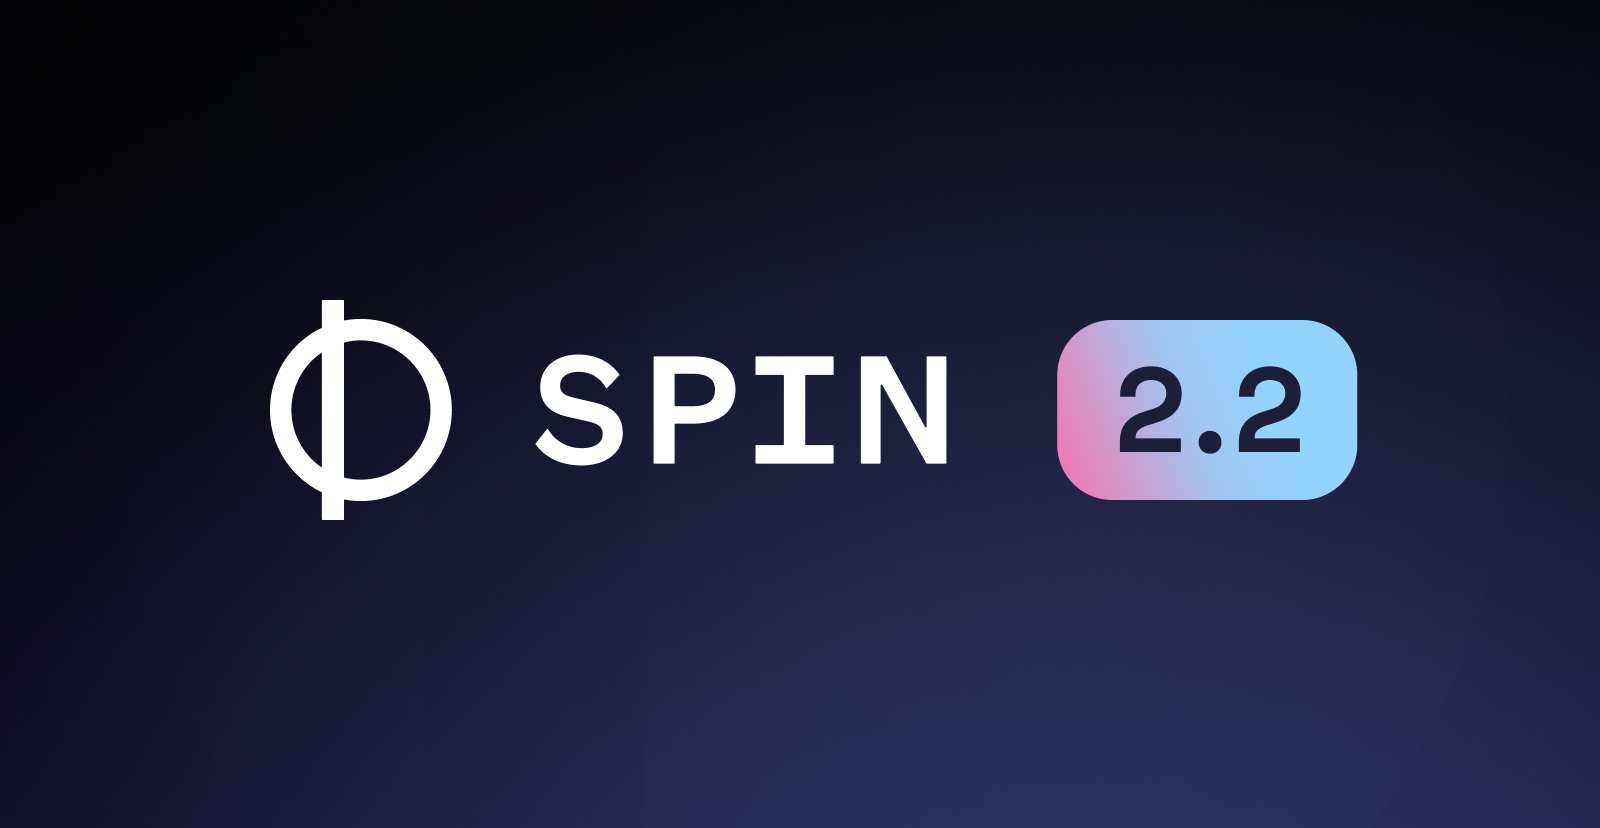 Spin 2.2